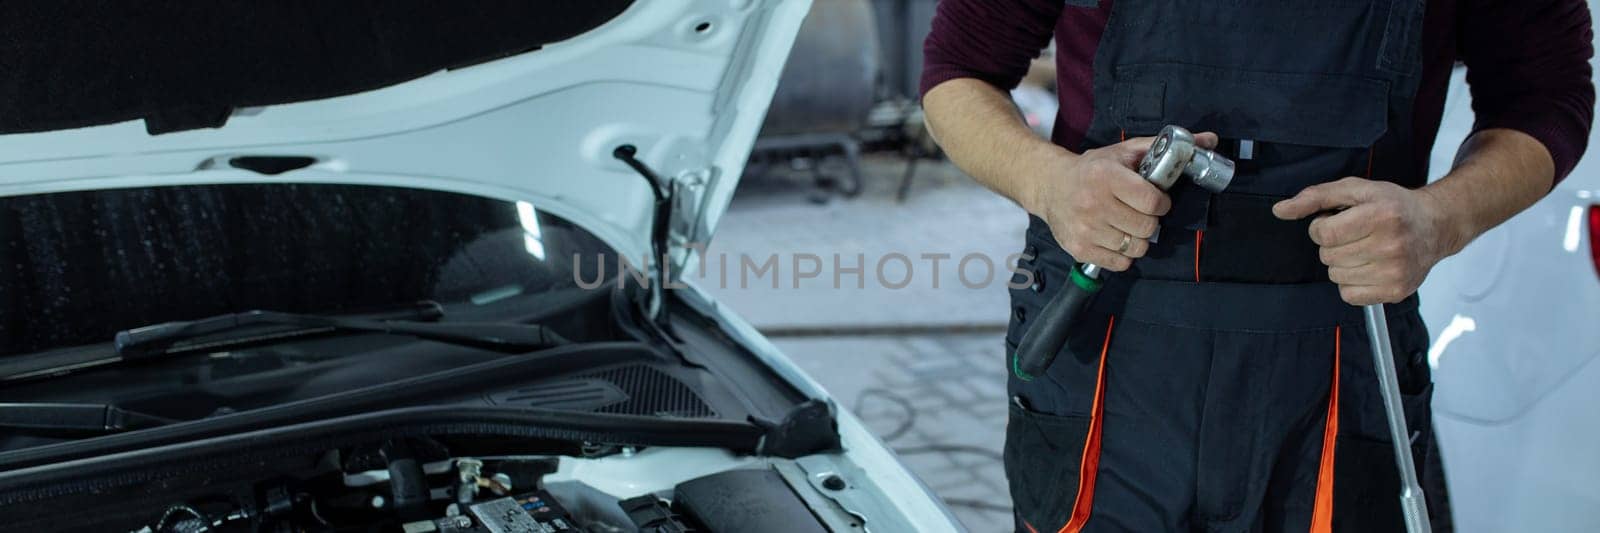 banner Car service. An auto mechanic is standing near the car with a tool in his hands. Vehicle technical inspection.